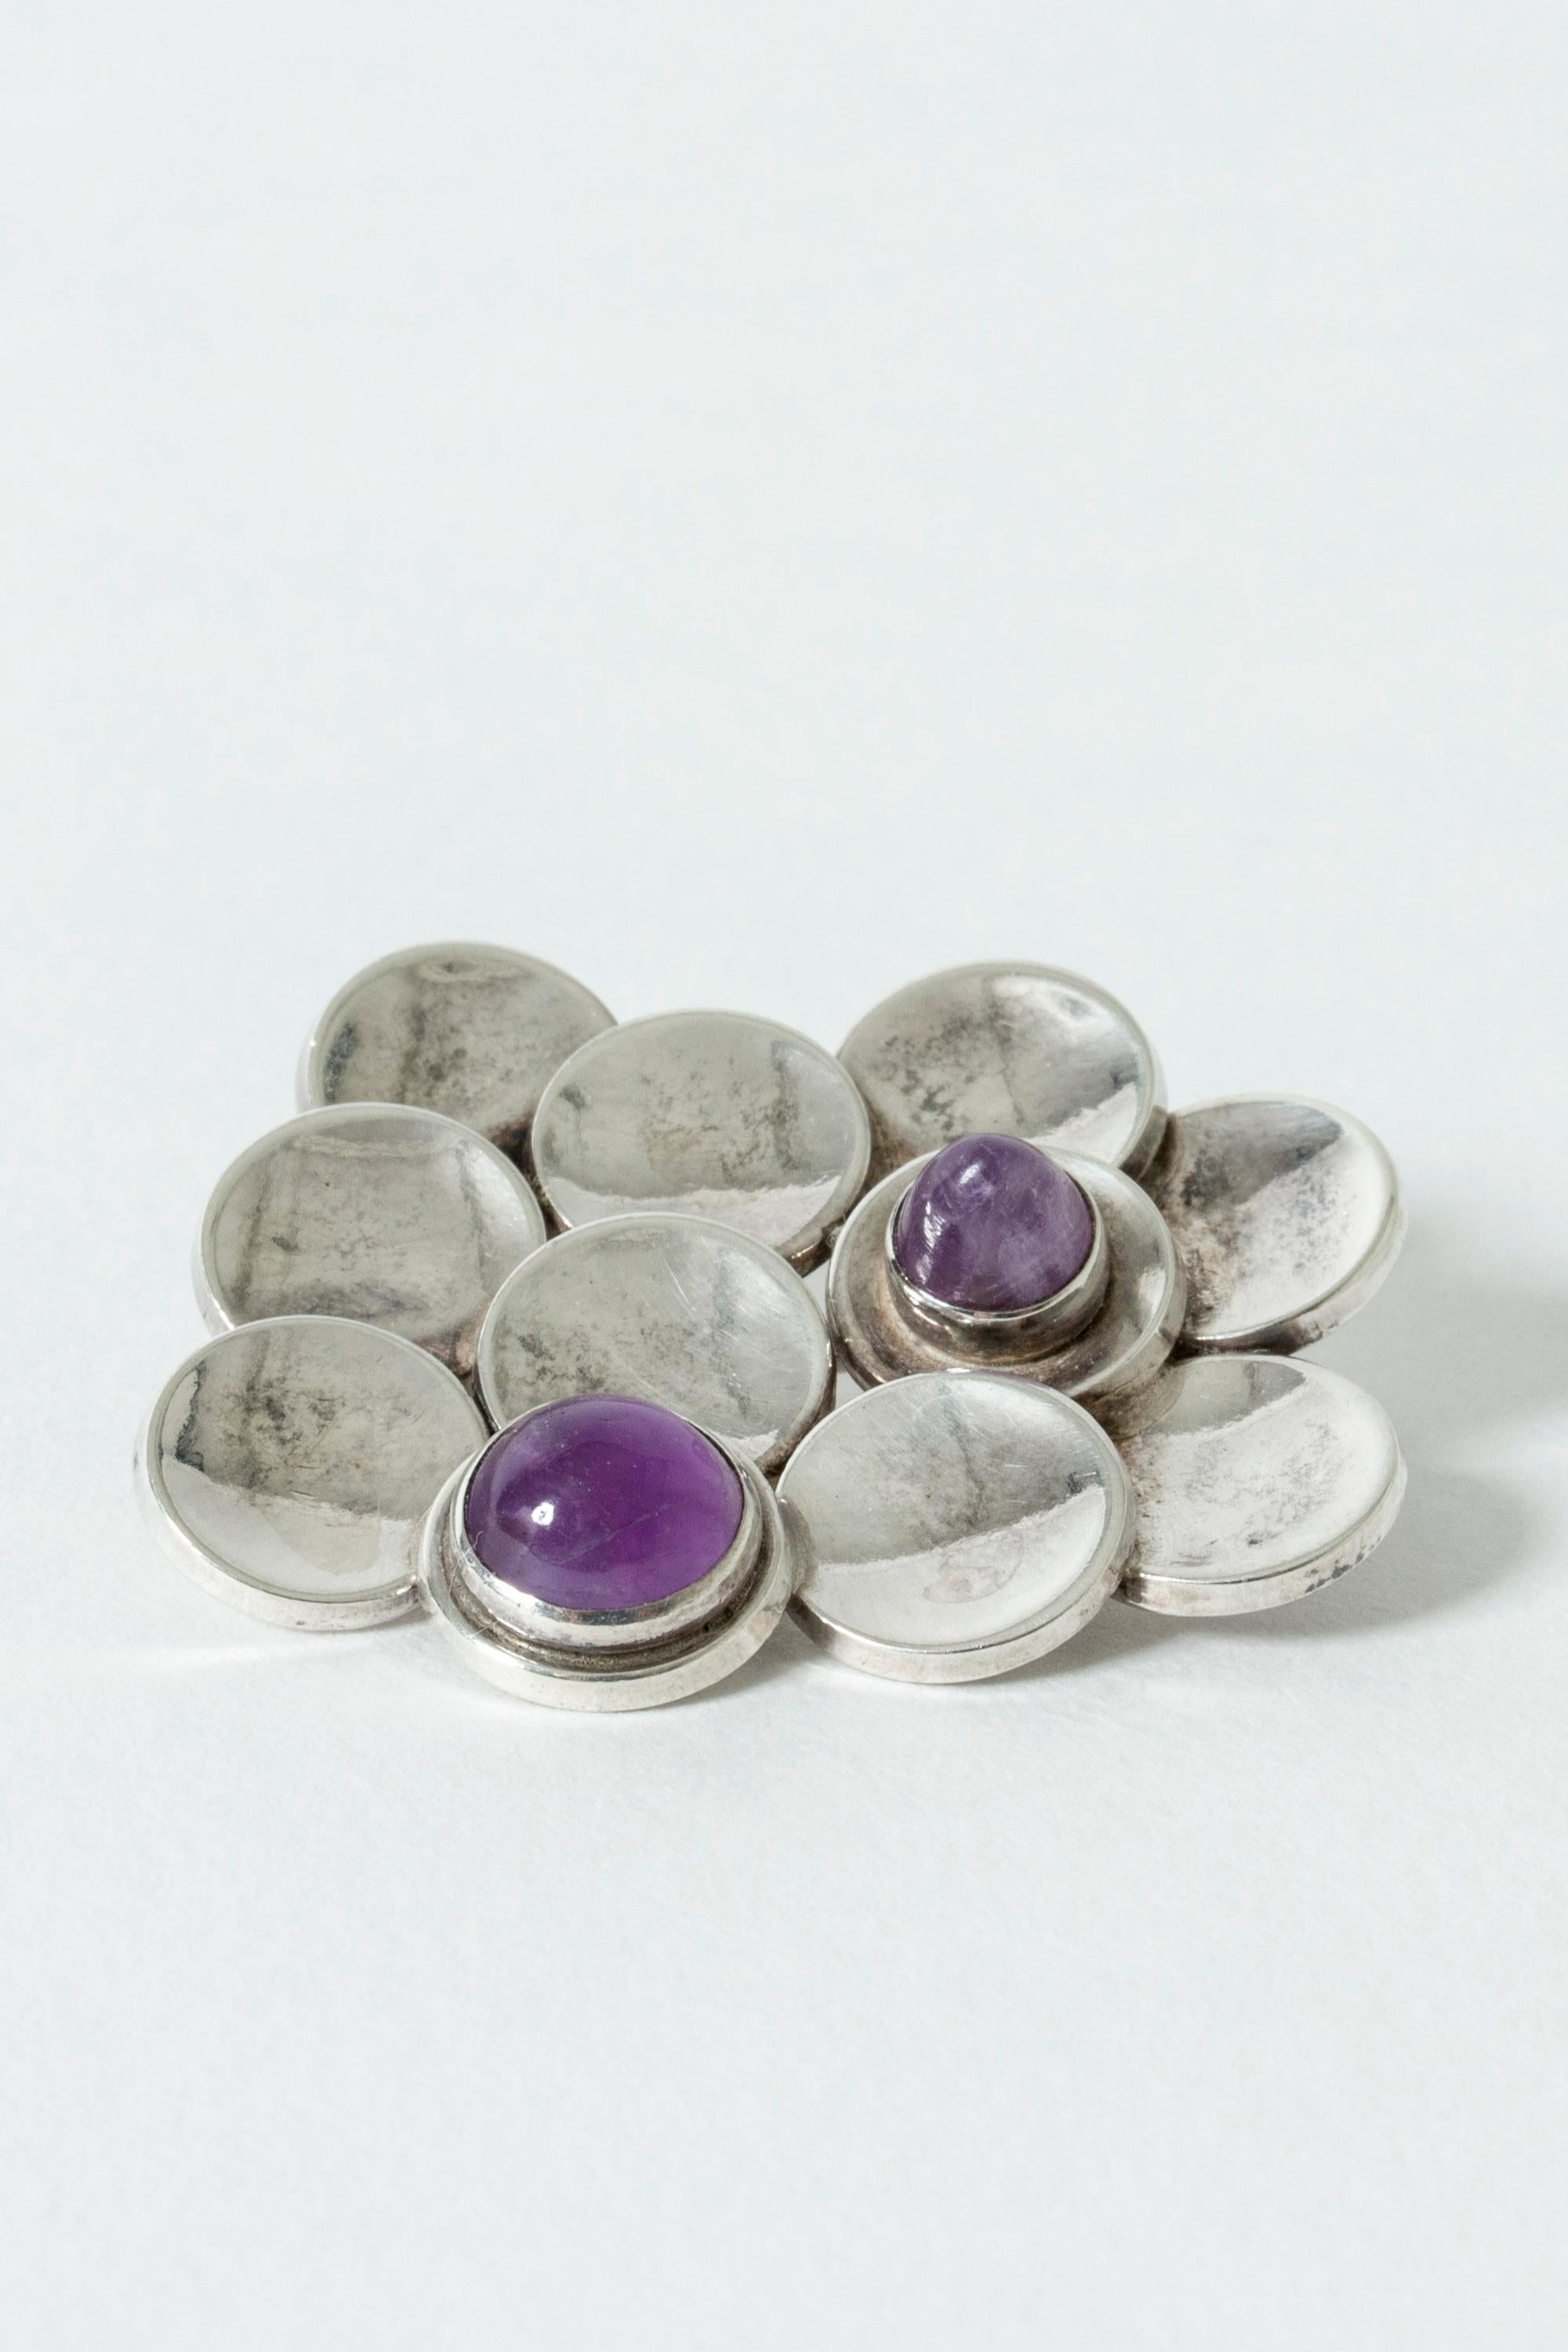 Lovely silver brooch from Victor Jansson, with two amethyst stones. Made from concave spheres in an appealing, cloud-like design.